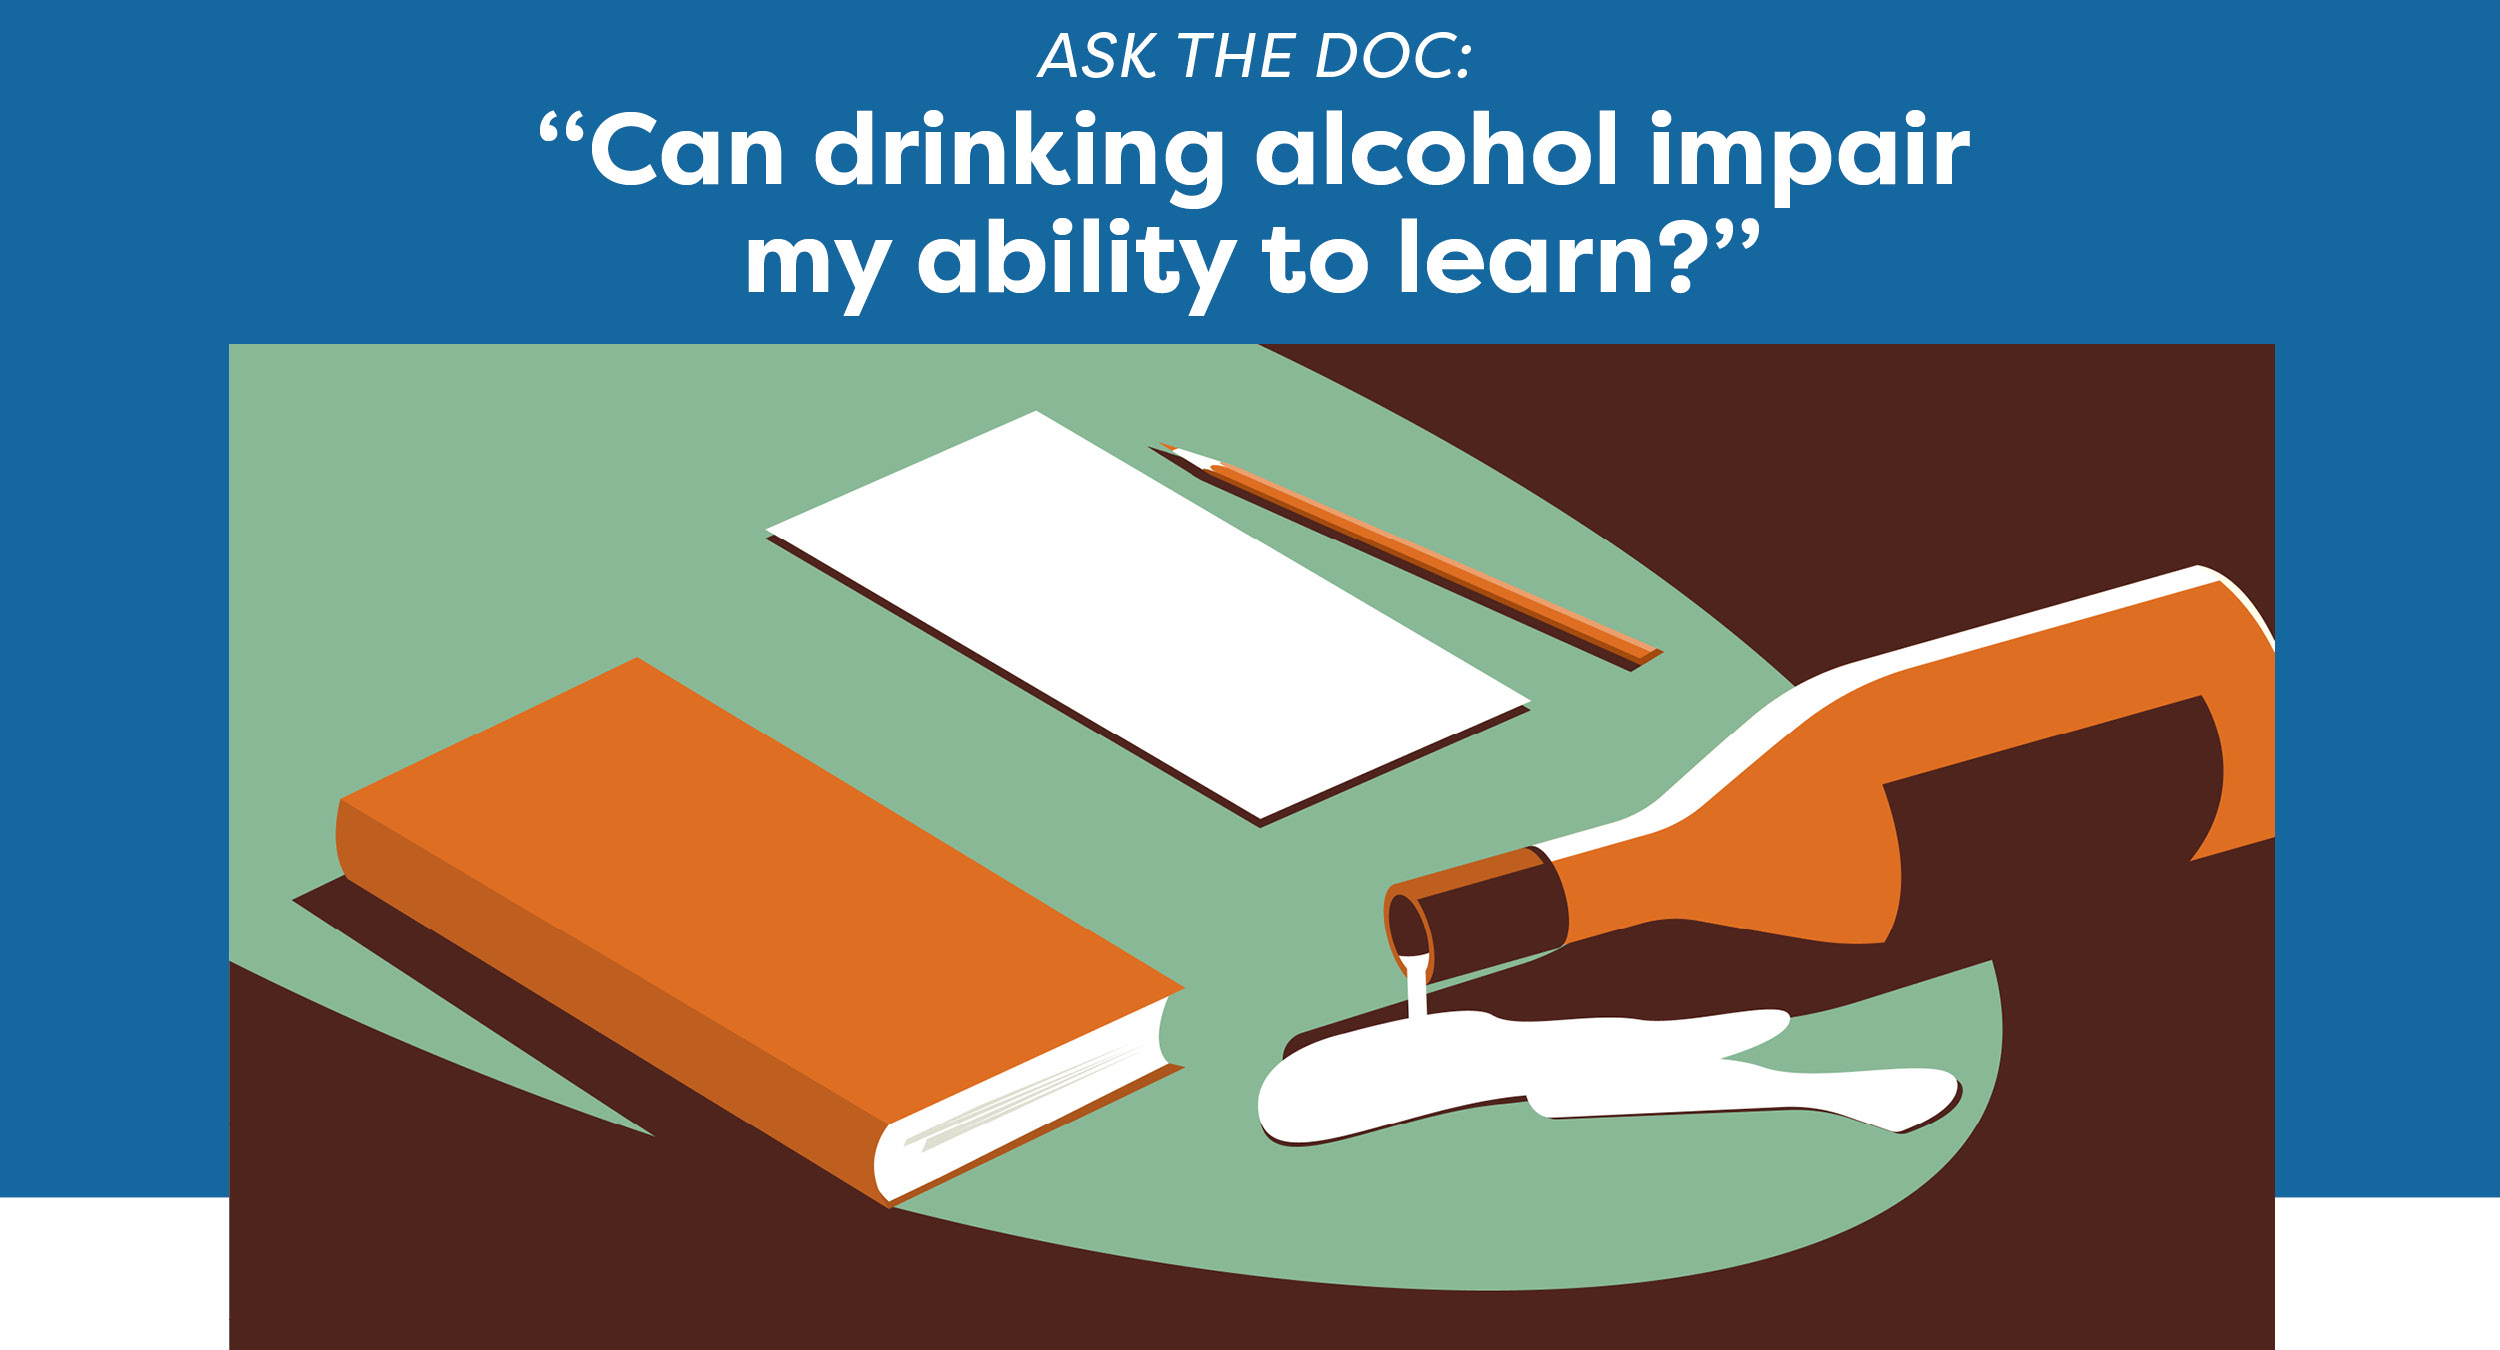 Ask the doc: “Can drinking alcohol impair my ability to learn?”